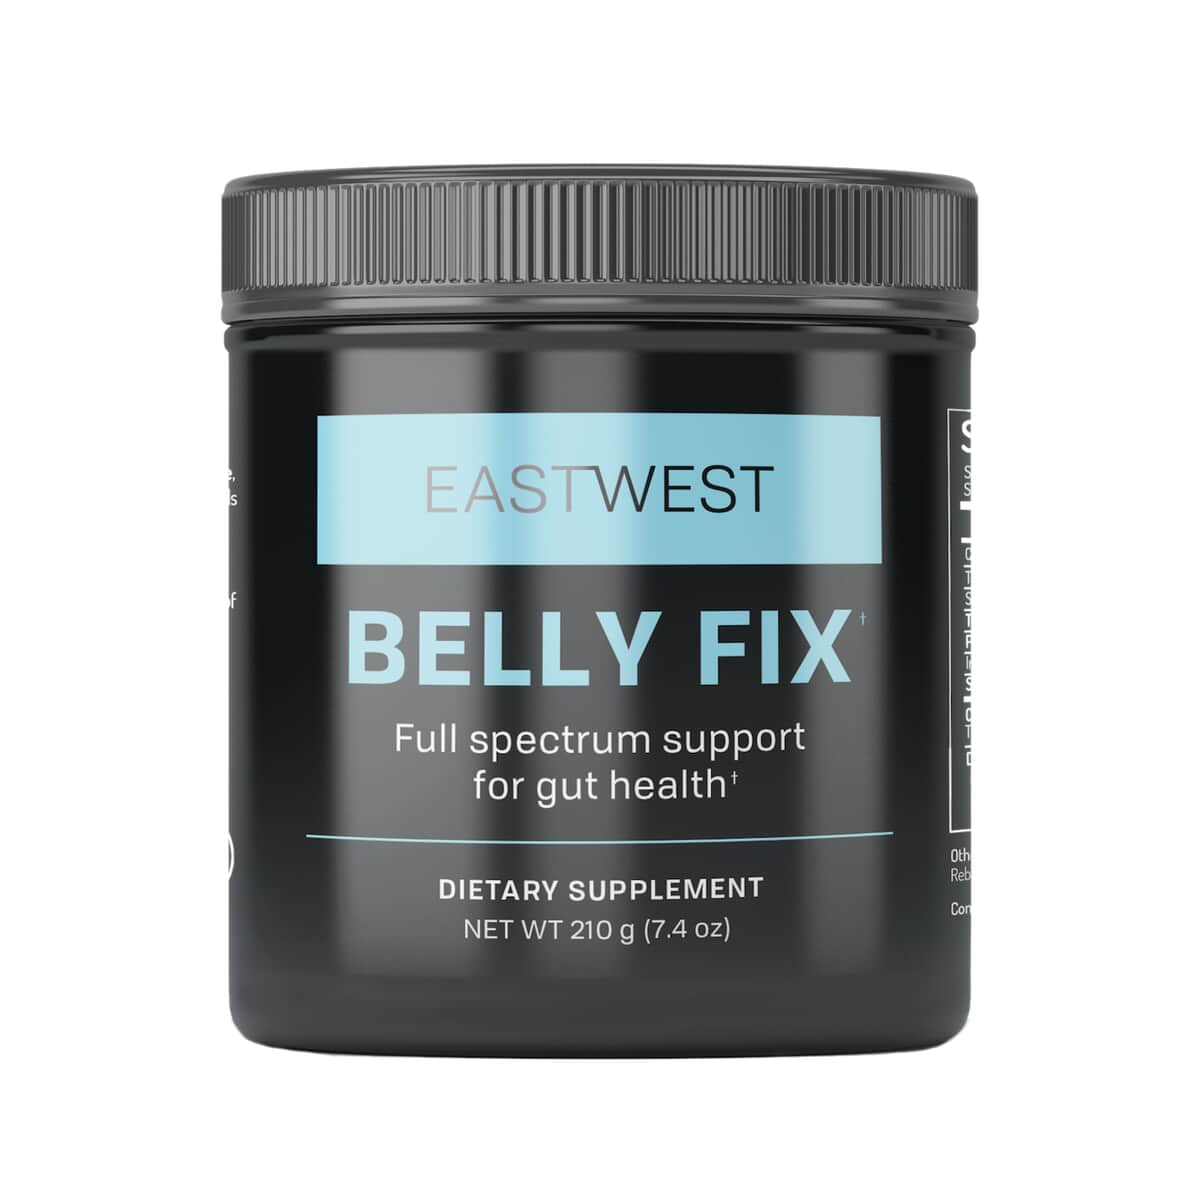 Dr. Taz Eastwest Belly Fix Dietary Supplement 30 Day Supply image number 0